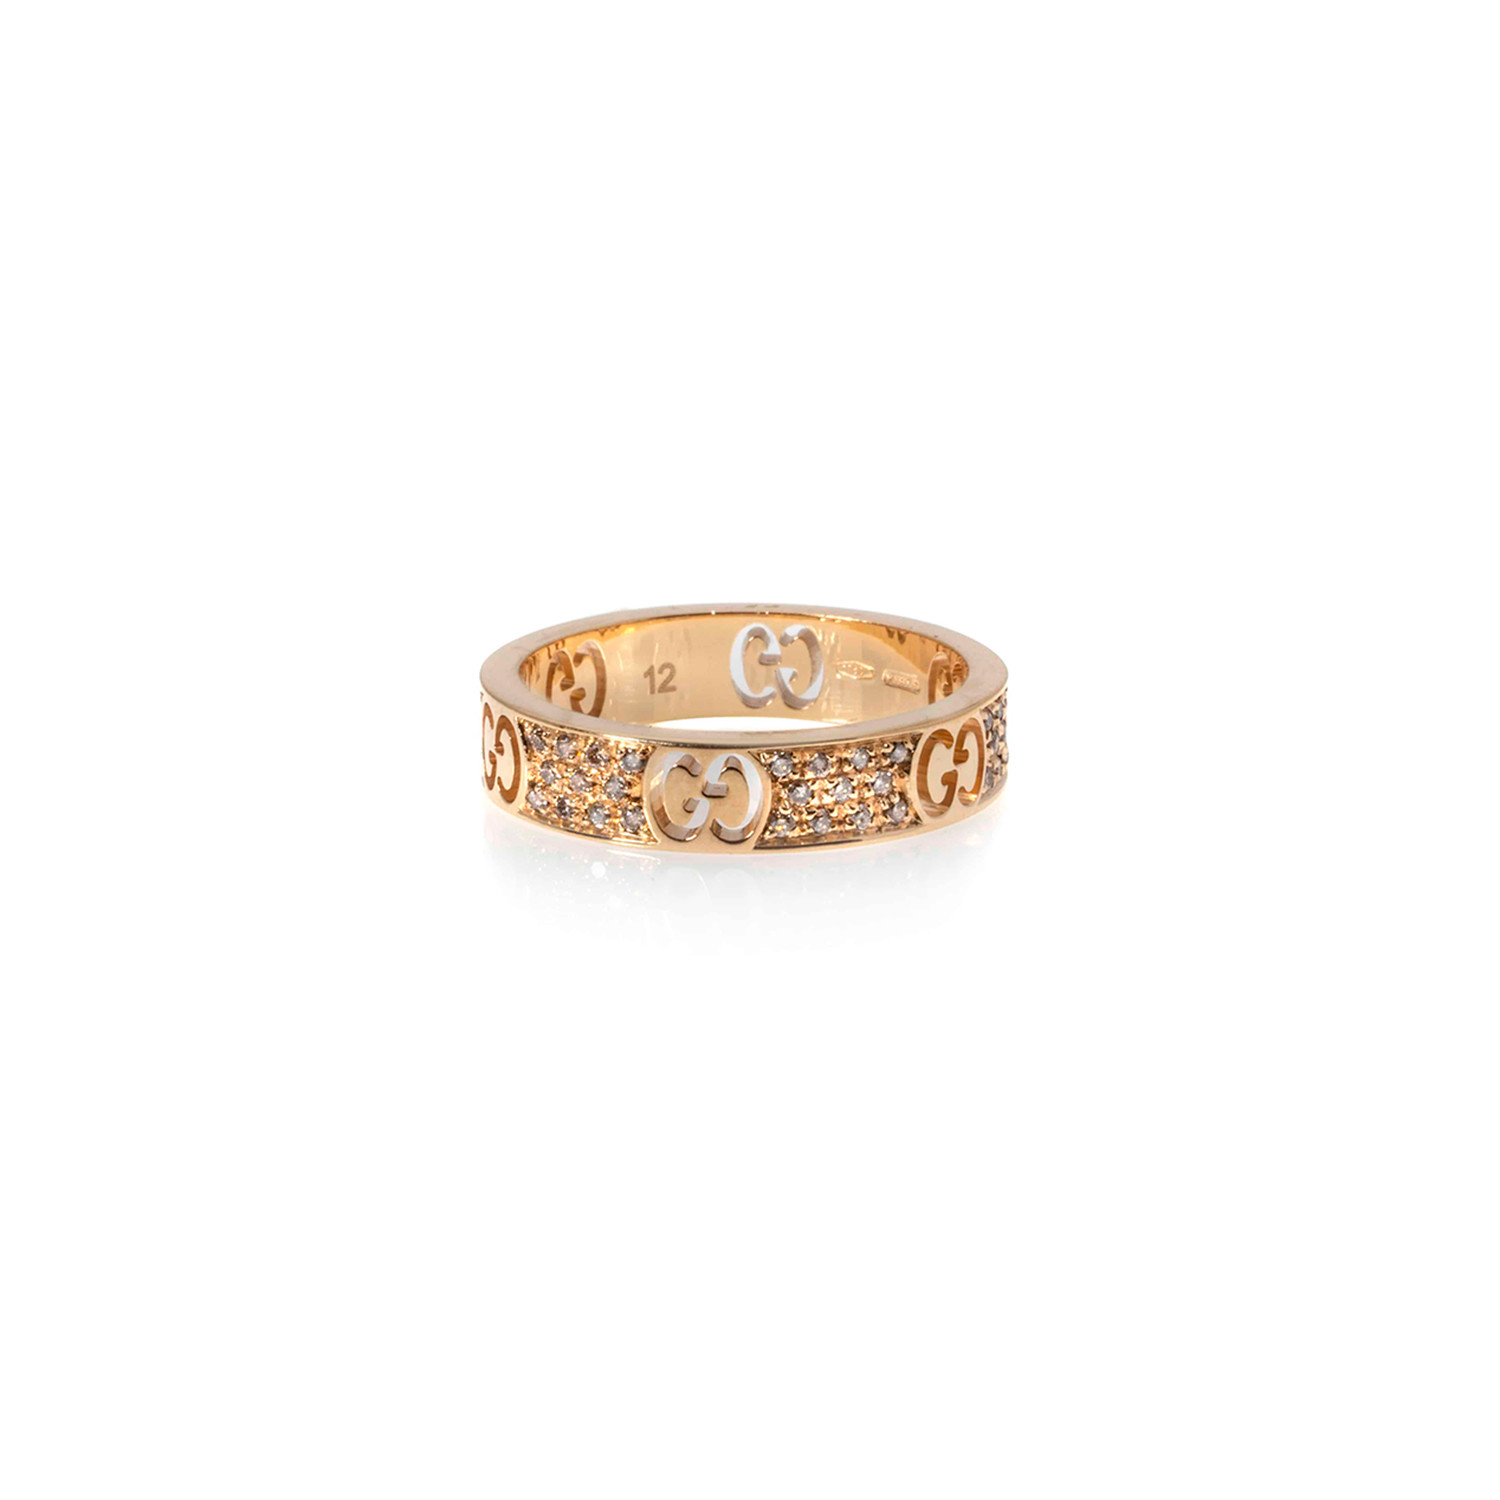 Gucci Icons 18k Rose Gold Ring // Ring Size: 6.25 - Stephen Webster ...